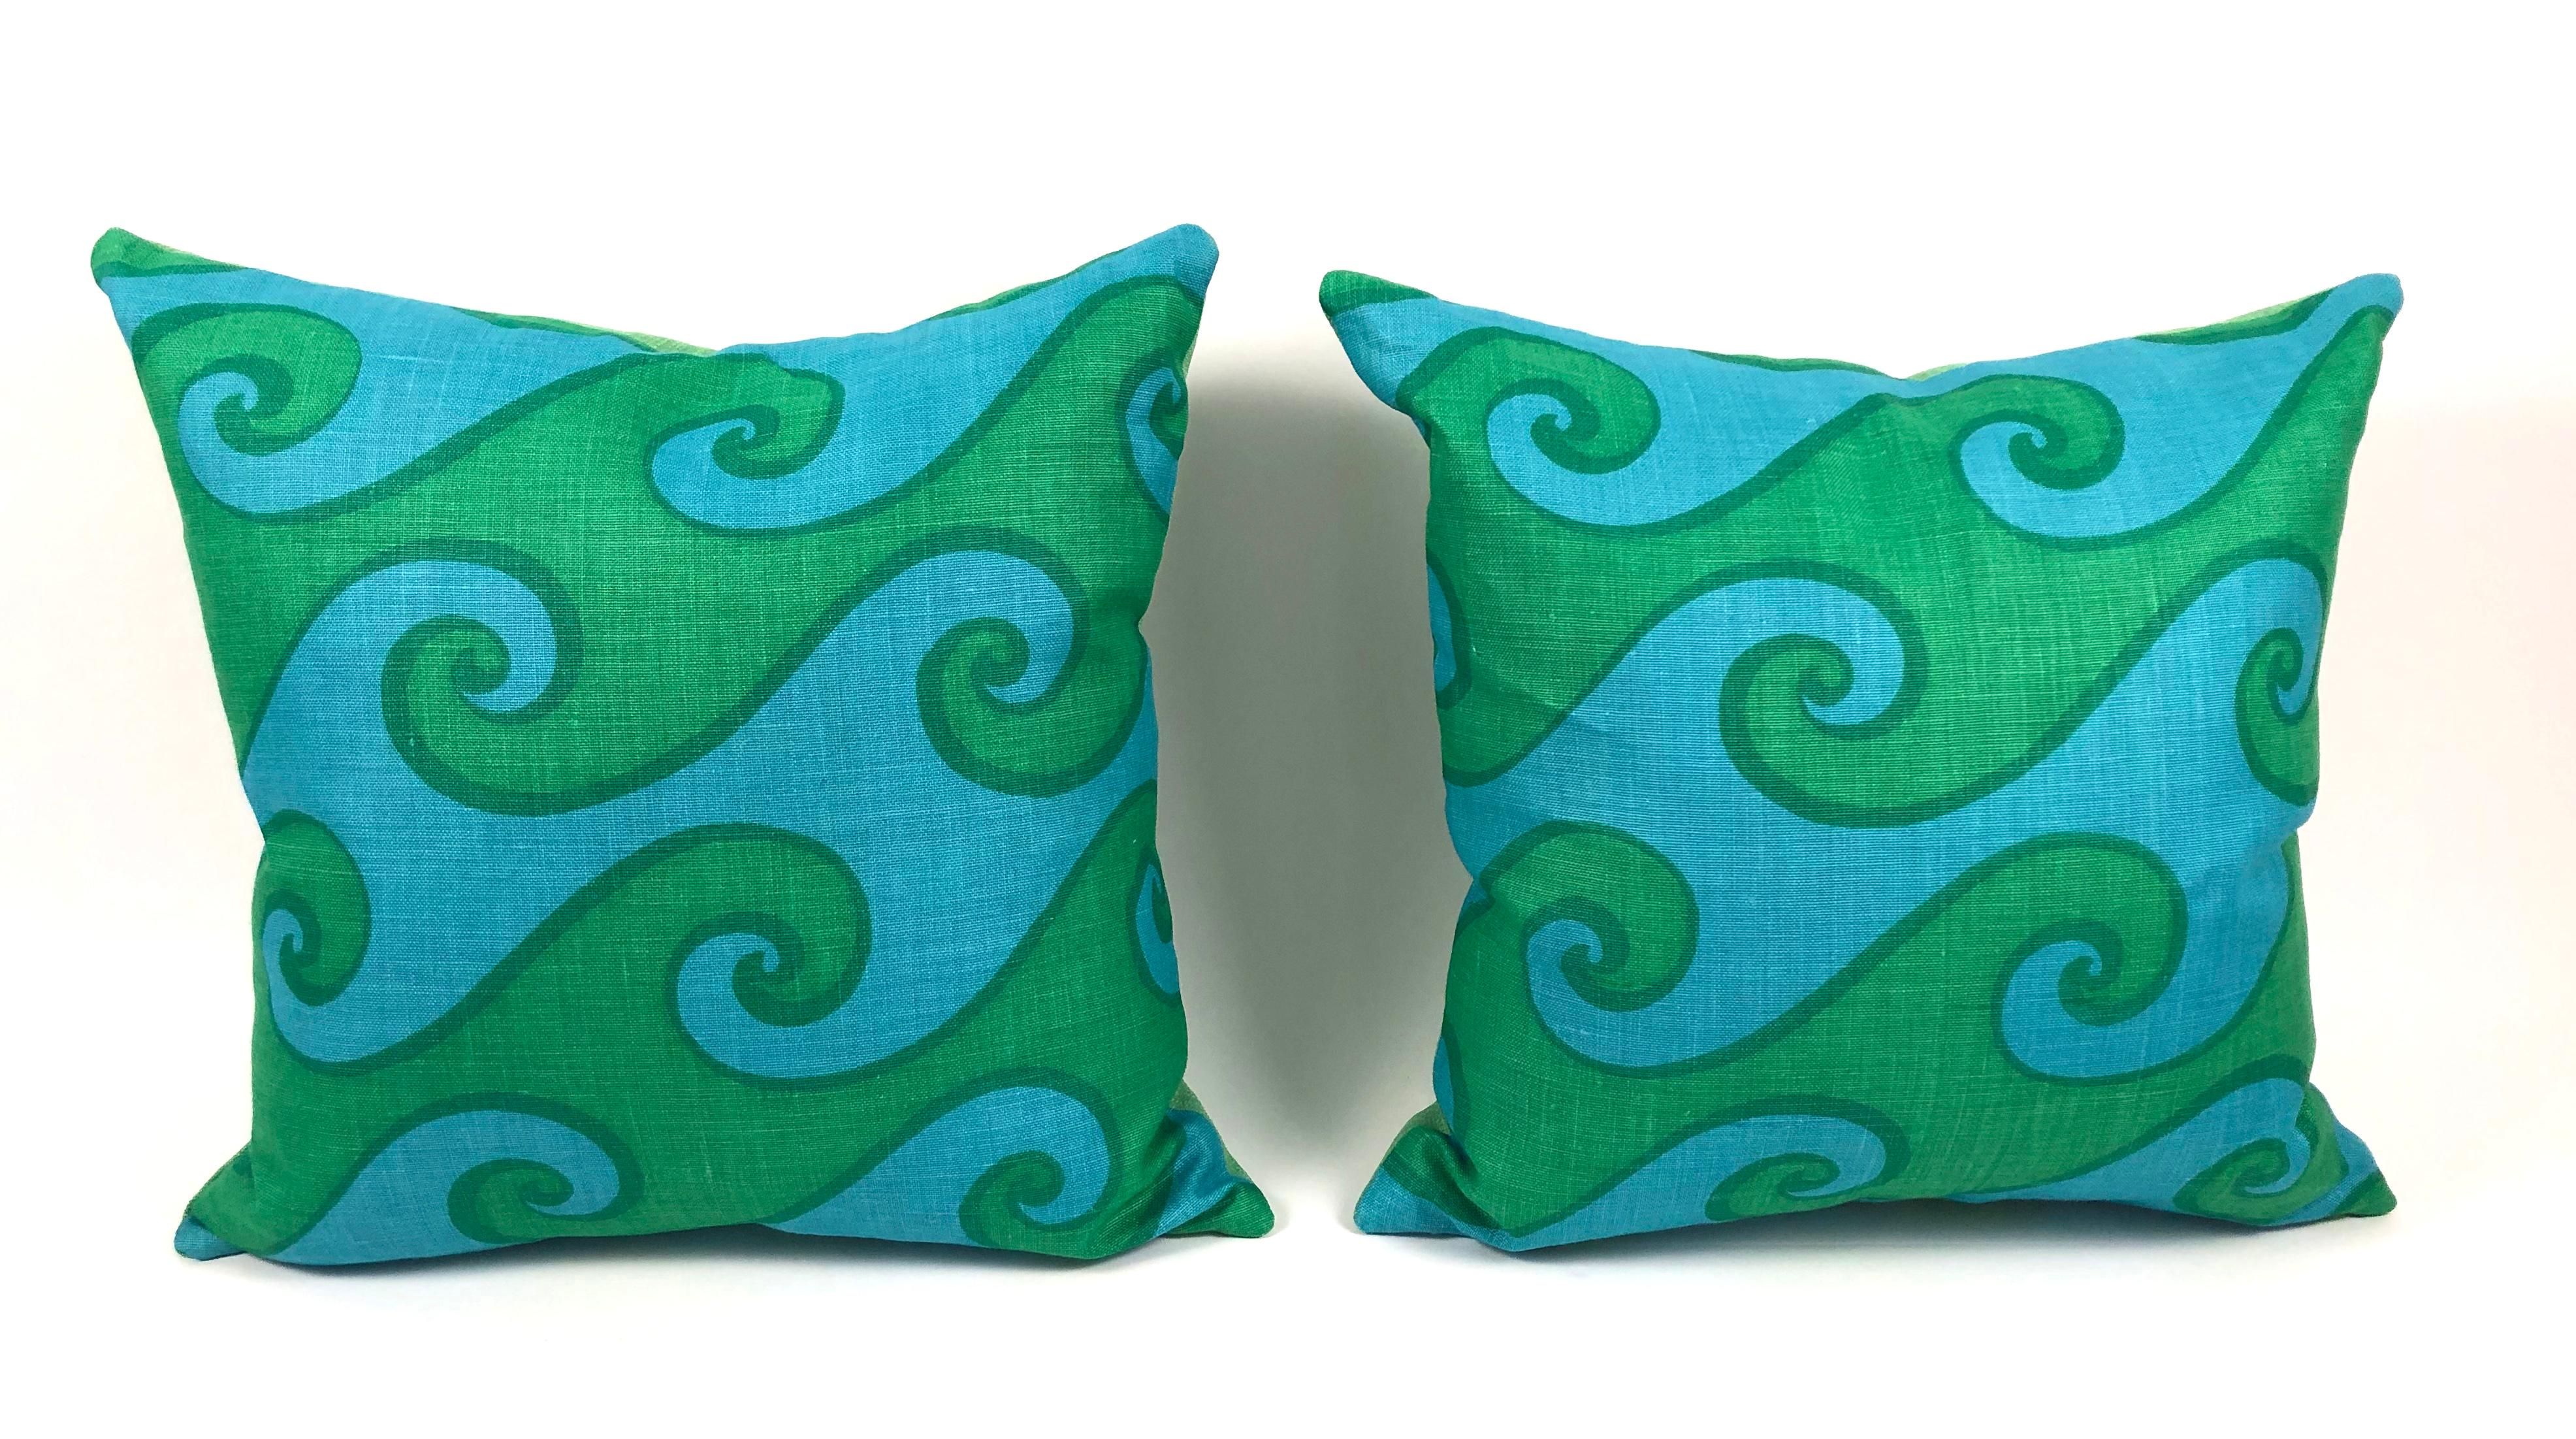 Vintage hand printed linen pillow in the Sea Scroll pattern, a vivid blue and green wave pattern by Elenhank. Sold individually. Made using original, mint condition fabric, with new down filled insert and green linen back. 

Elenhank was started by